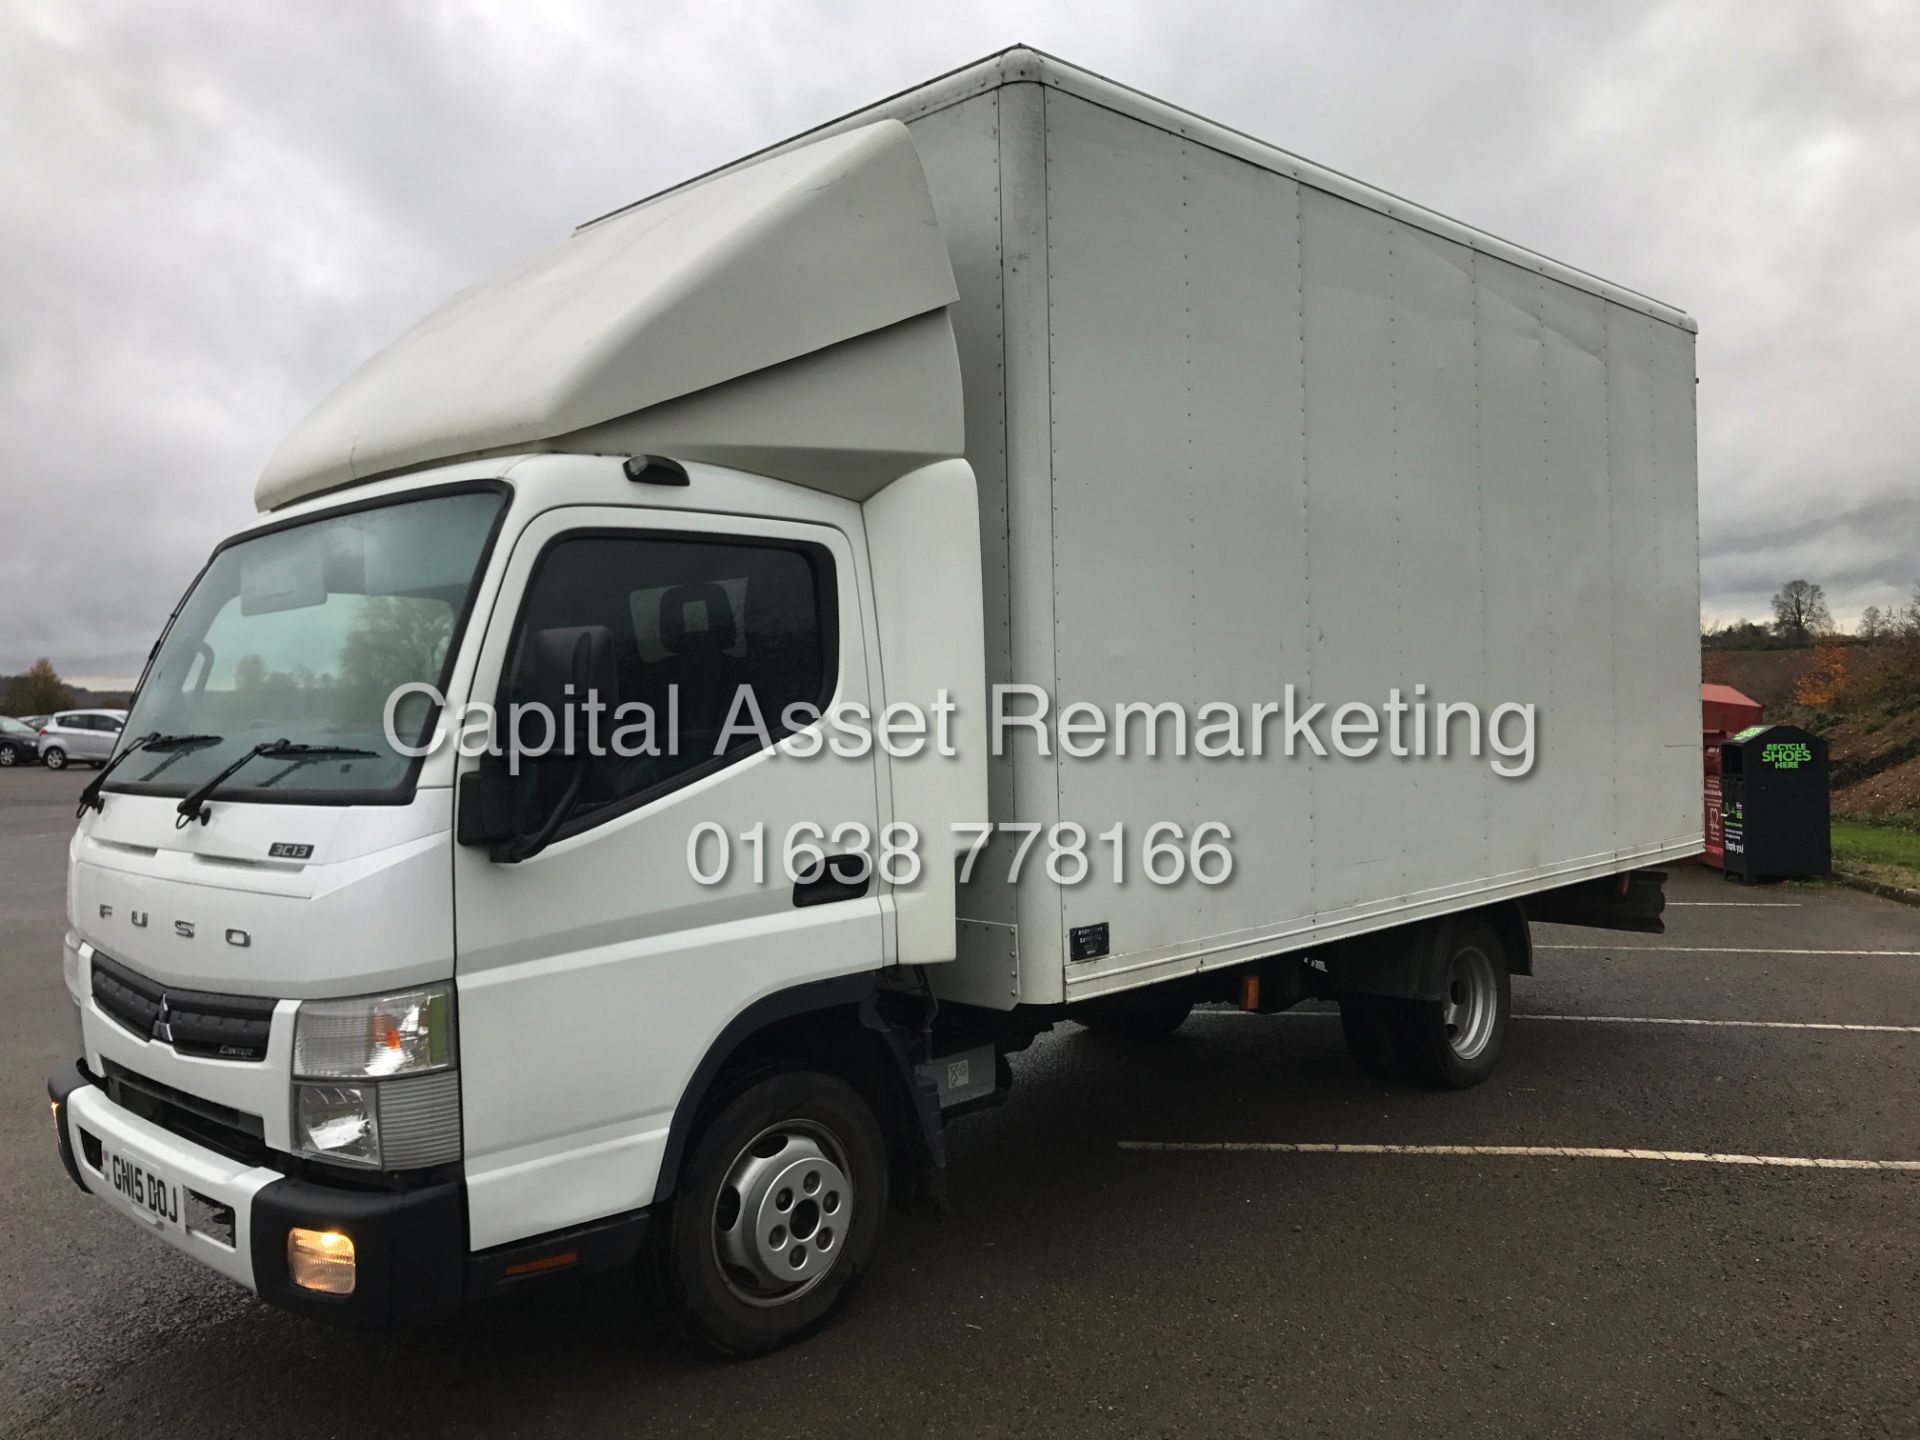 (ON SALE) MITSUBISHI FUSO CANTER 3.0D 3C13 (15 REG-NEW SHAPE) 15 FOOT BODY- 1 OWNER *IDEAL REMOVALS* - Image 2 of 17